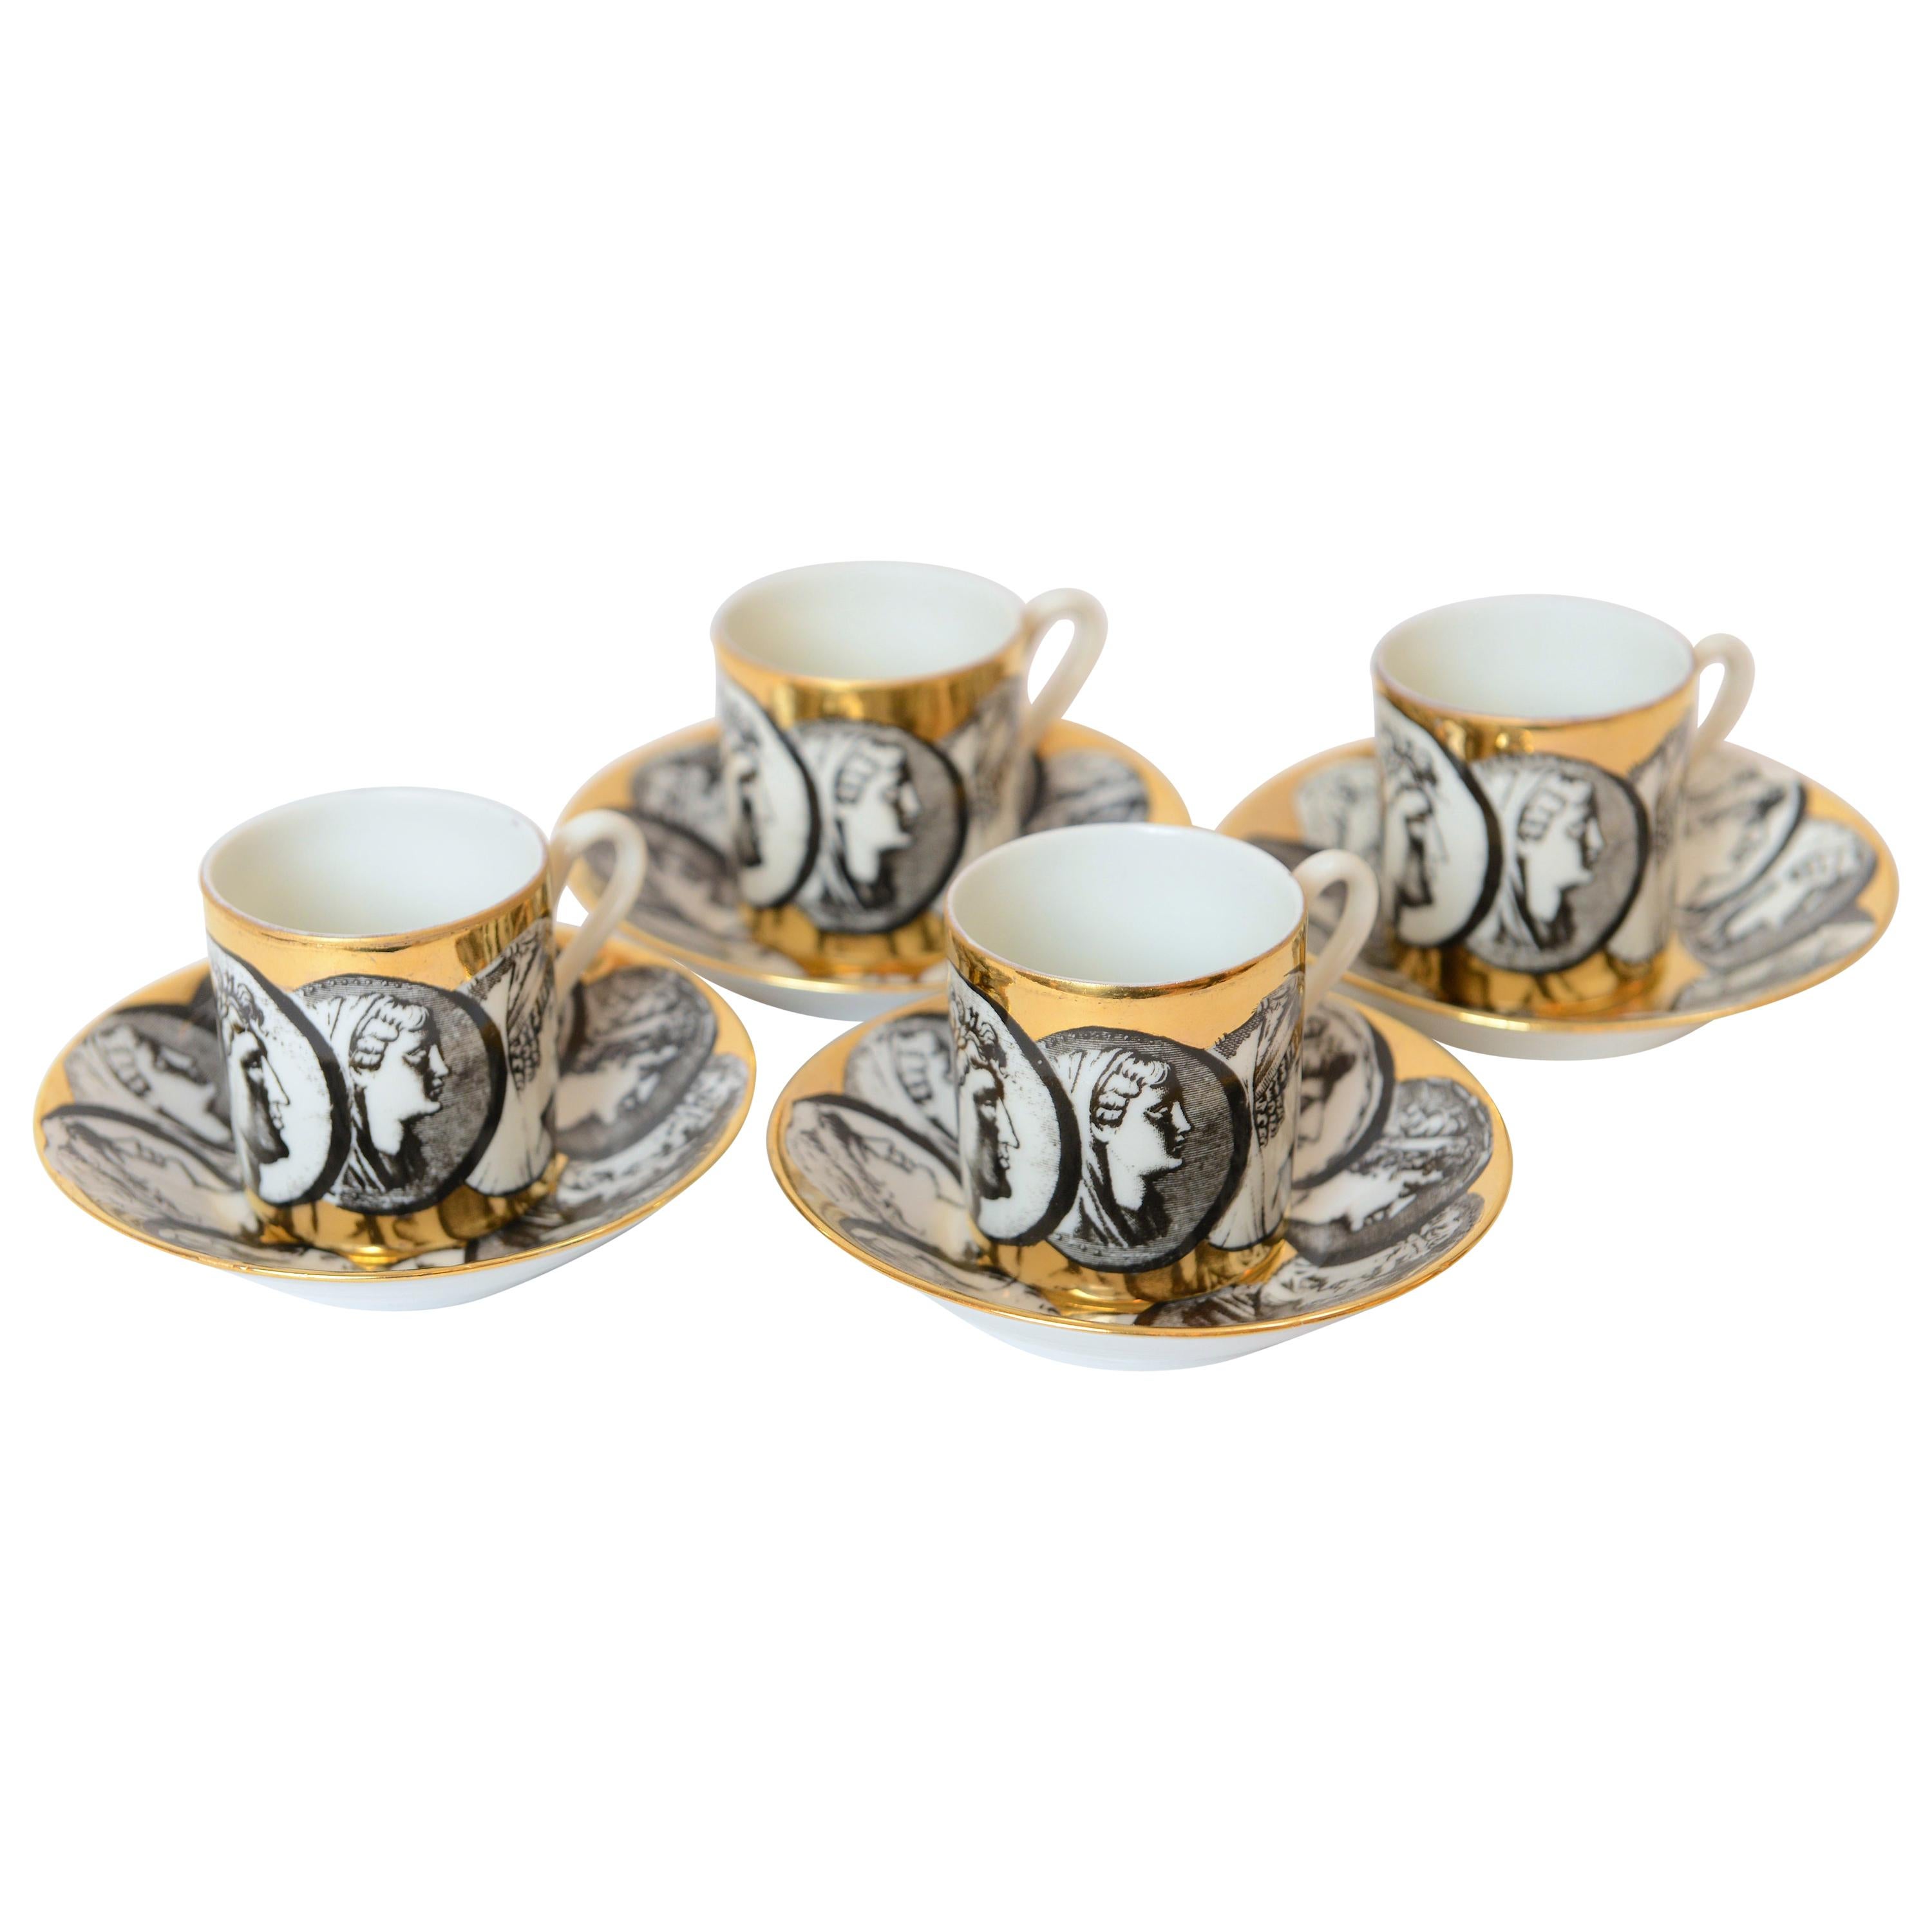 1950s Piero Fornasetti ‘Cammei’ Espresso Cups and Saucers, Italy